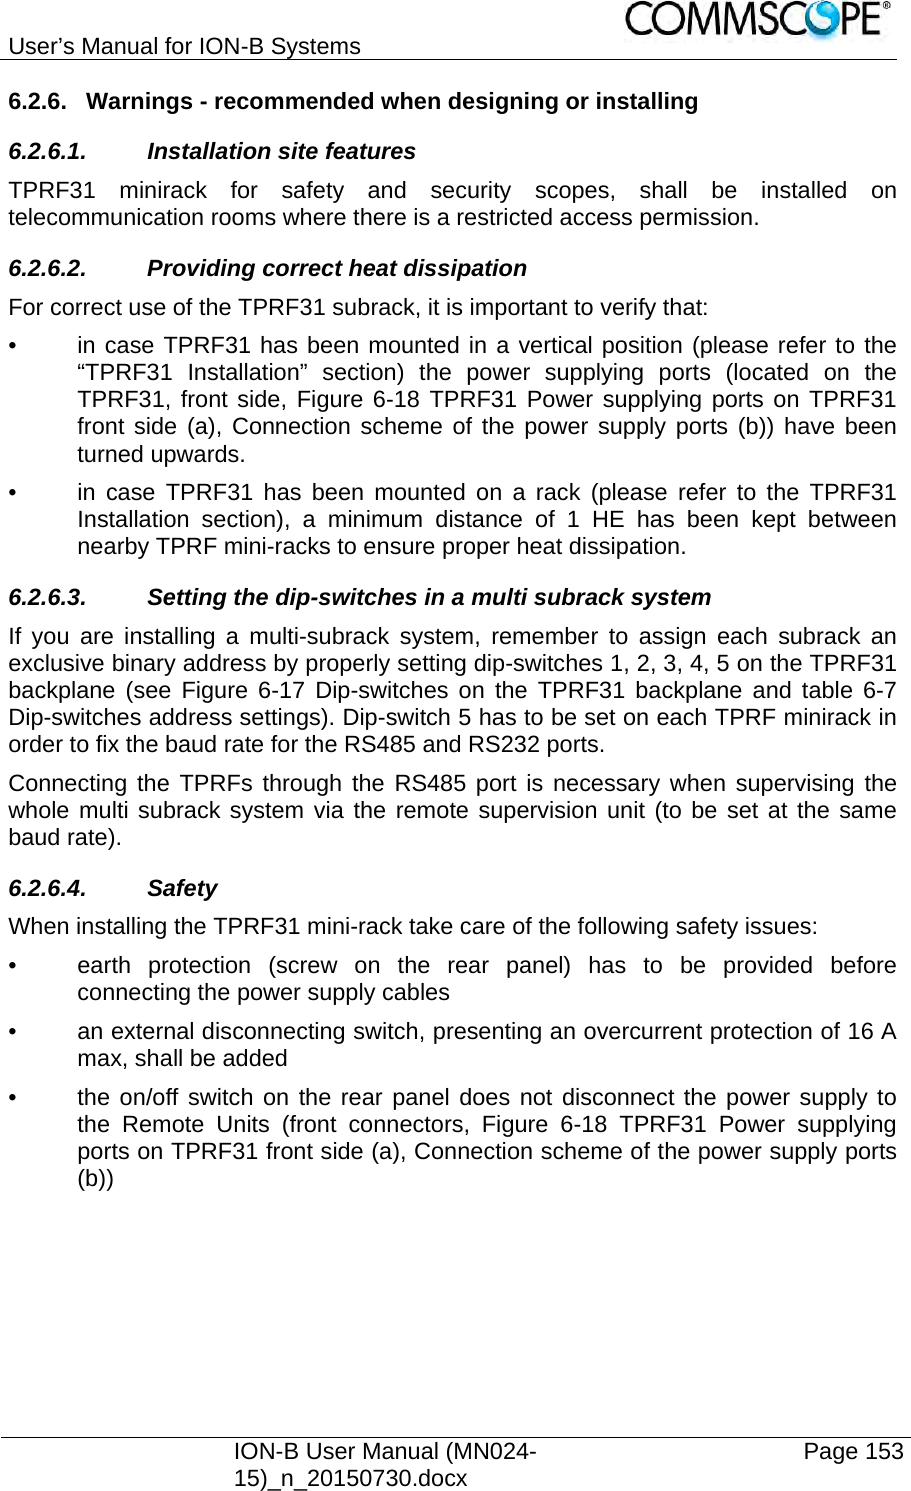 User’s Manual for ION-B Systems    ION-B User Manual (MN024-15)_n_20150730.docx  Page 153 6.2.6.  Warnings - recommended when designing or installing 6.2.6.1. Installation site features TPRF31 minirack for safety and security scopes, shall be installed on telecommunication rooms where there is a restricted access permission. 6.2.6.2.  Providing correct heat dissipation For correct use of the TPRF31 subrack, it is important to verify that: •  in case TPRF31 has been mounted in a vertical position (please refer to the “TPRF31 Installation” section) the power supplying ports (located on the TPRF31, front side, Figure 6-18 TPRF31 Power supplying ports on TPRF31 front side (a), Connection scheme of the power supply ports (b)) have been turned upwards. •  in case TPRF31 has been mounted on a rack (please refer to the TPRF31 Installation section), a minimum distance of 1 HE has been kept between nearby TPRF mini-racks to ensure proper heat dissipation. 6.2.6.3.  Setting the dip-switches in a multi subrack system If you are installing a multi-subrack system, remember to assign each subrack an exclusive binary address by properly setting dip-switches 1, 2, 3, 4, 5 on the TPRF31 backplane (see Figure 6-17 Dip-switches on the TPRF31 backplane and table 6-7 Dip-switches address settings). Dip-switch 5 has to be set on each TPRF minirack in order to fix the baud rate for the RS485 and RS232 ports.  Connecting the TPRFs through the RS485 port is necessary when supervising the whole multi subrack system via the remote supervision unit (to be set at the same baud rate). 6.2.6.4. Safety  When installing the TPRF31 mini-rack take care of the following safety issues: •  earth protection (screw on the rear panel) has to be provided before connecting the power supply cables •  an external disconnecting switch, presenting an overcurrent protection of 16 A max, shall be added •  the on/off switch on the rear panel does not disconnect the power supply to the Remote Units (front connectors, Figure 6-18 TPRF31 Power supplying ports on TPRF31 front side (a), Connection scheme of the power supply ports (b)) 